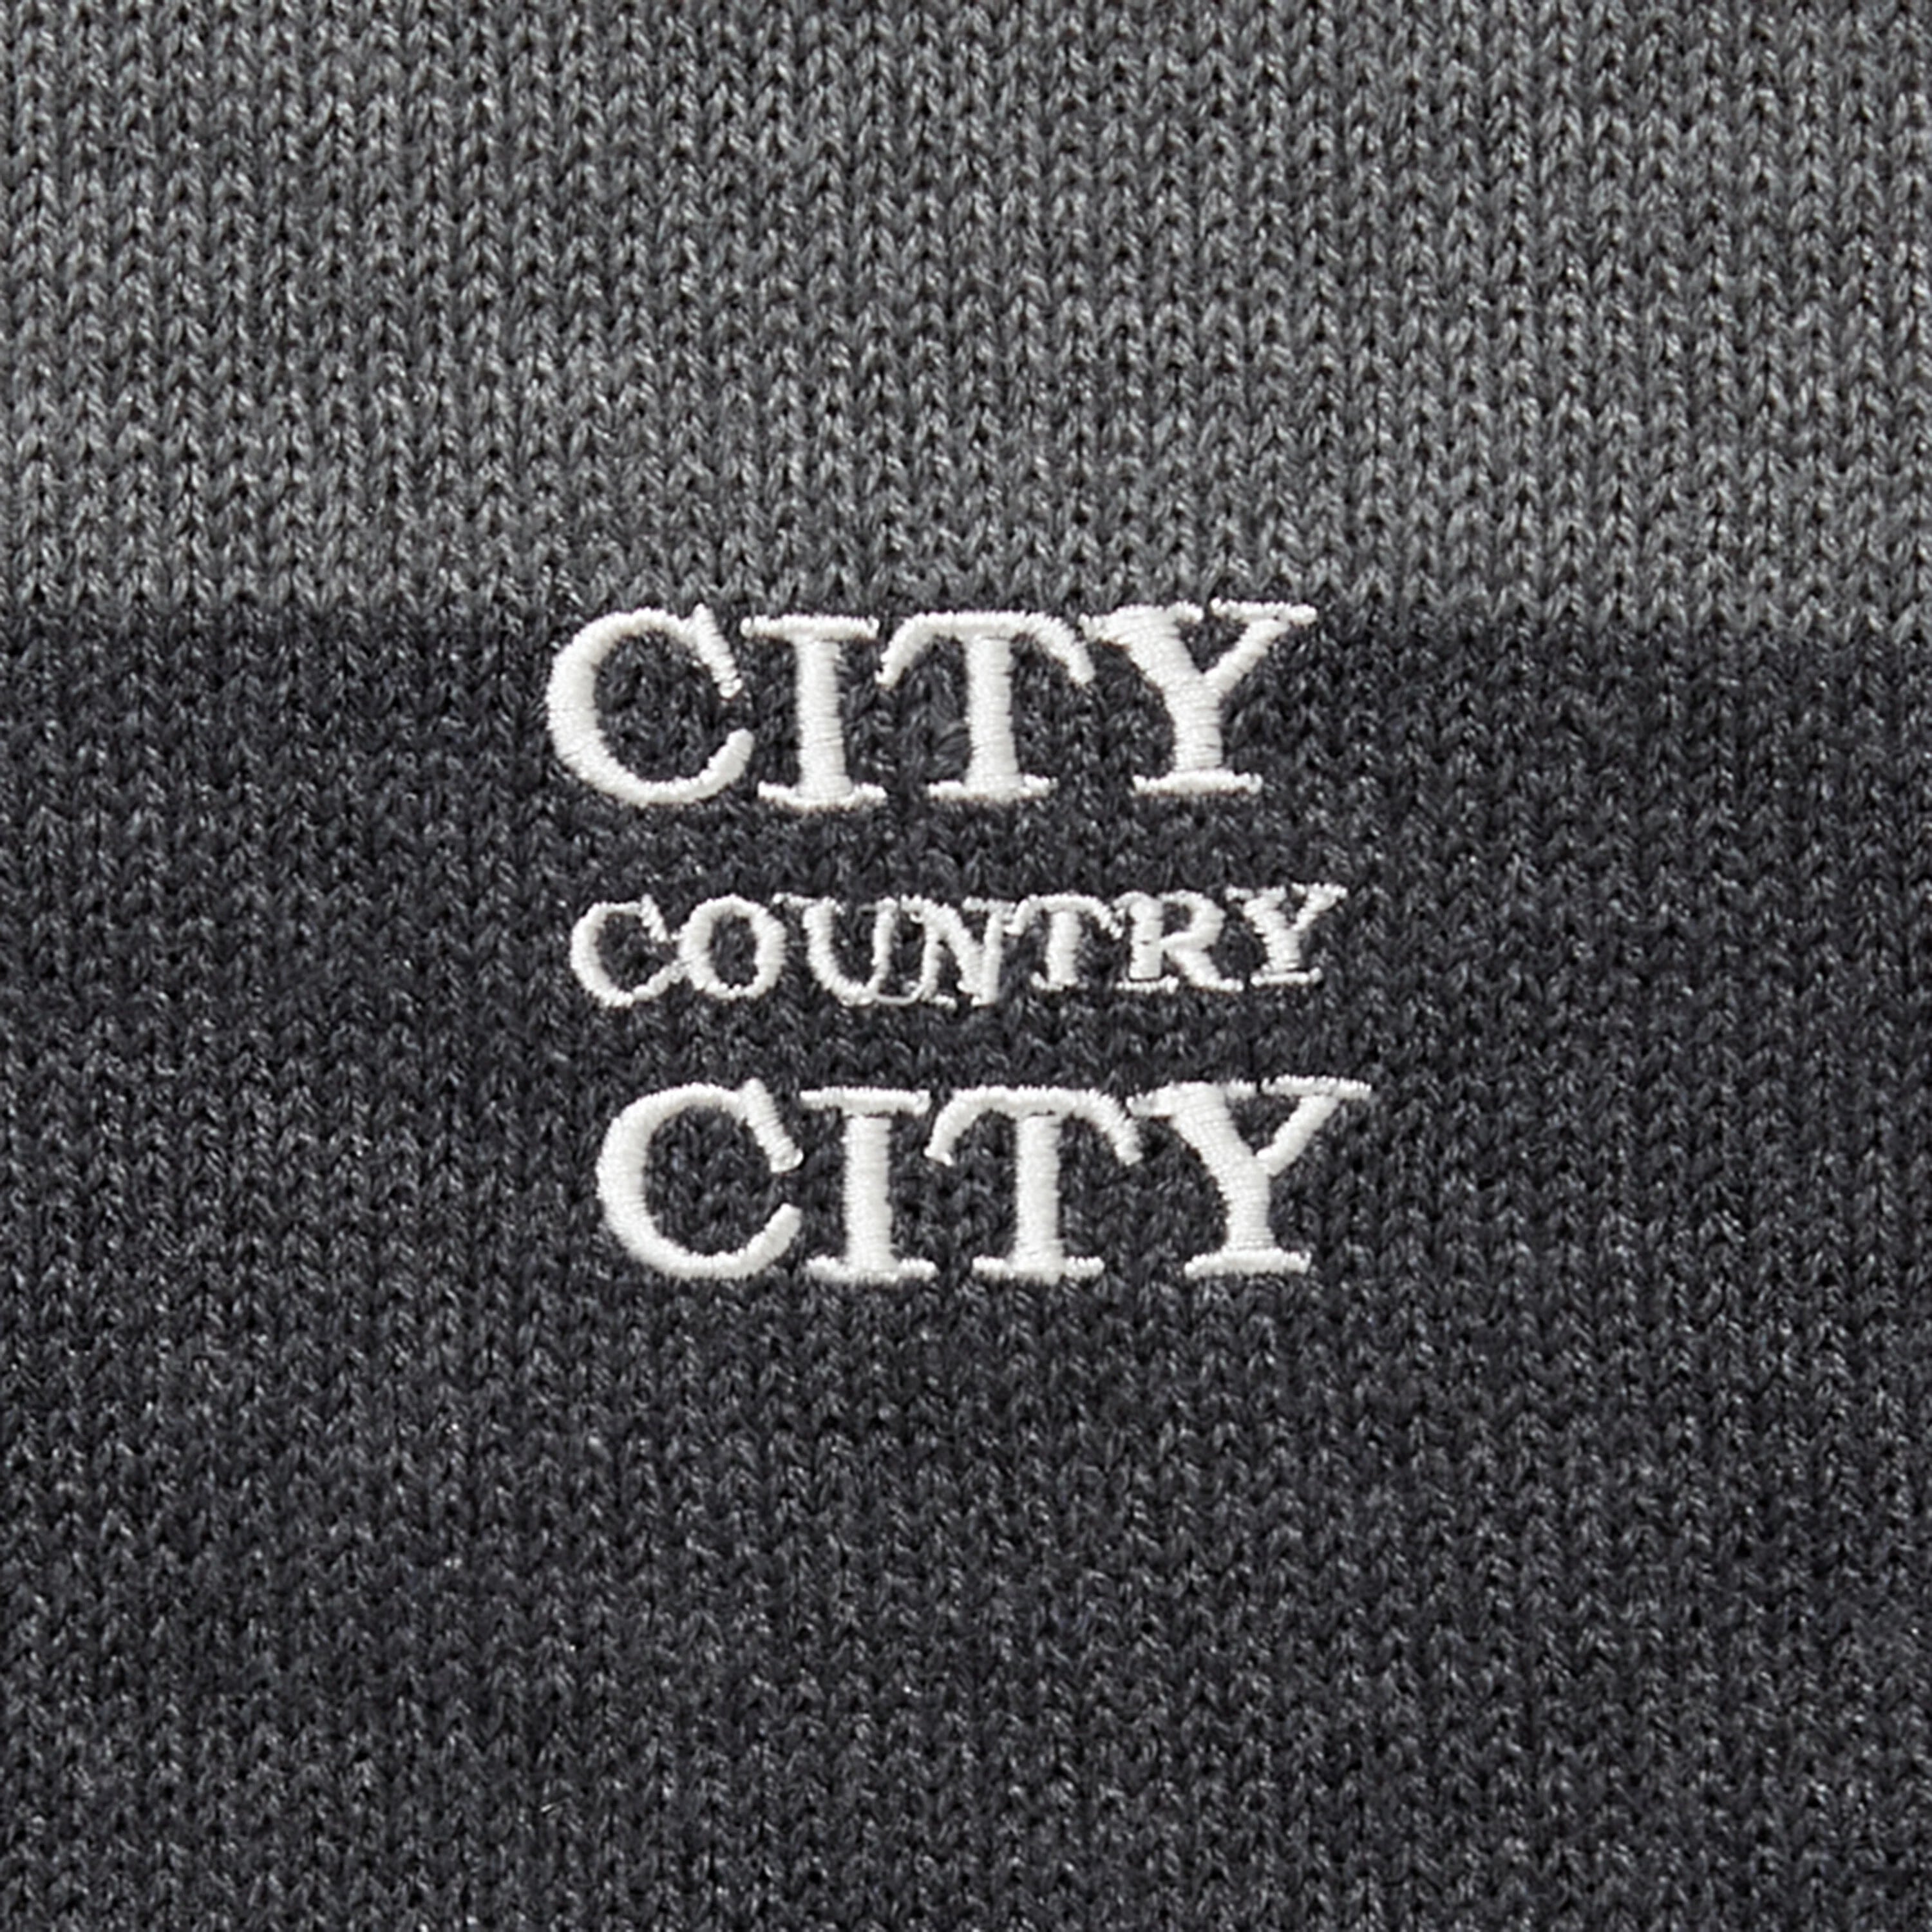 CITY COUNTRY CITY / EMBROIDERED LOGO BORDER KNIT